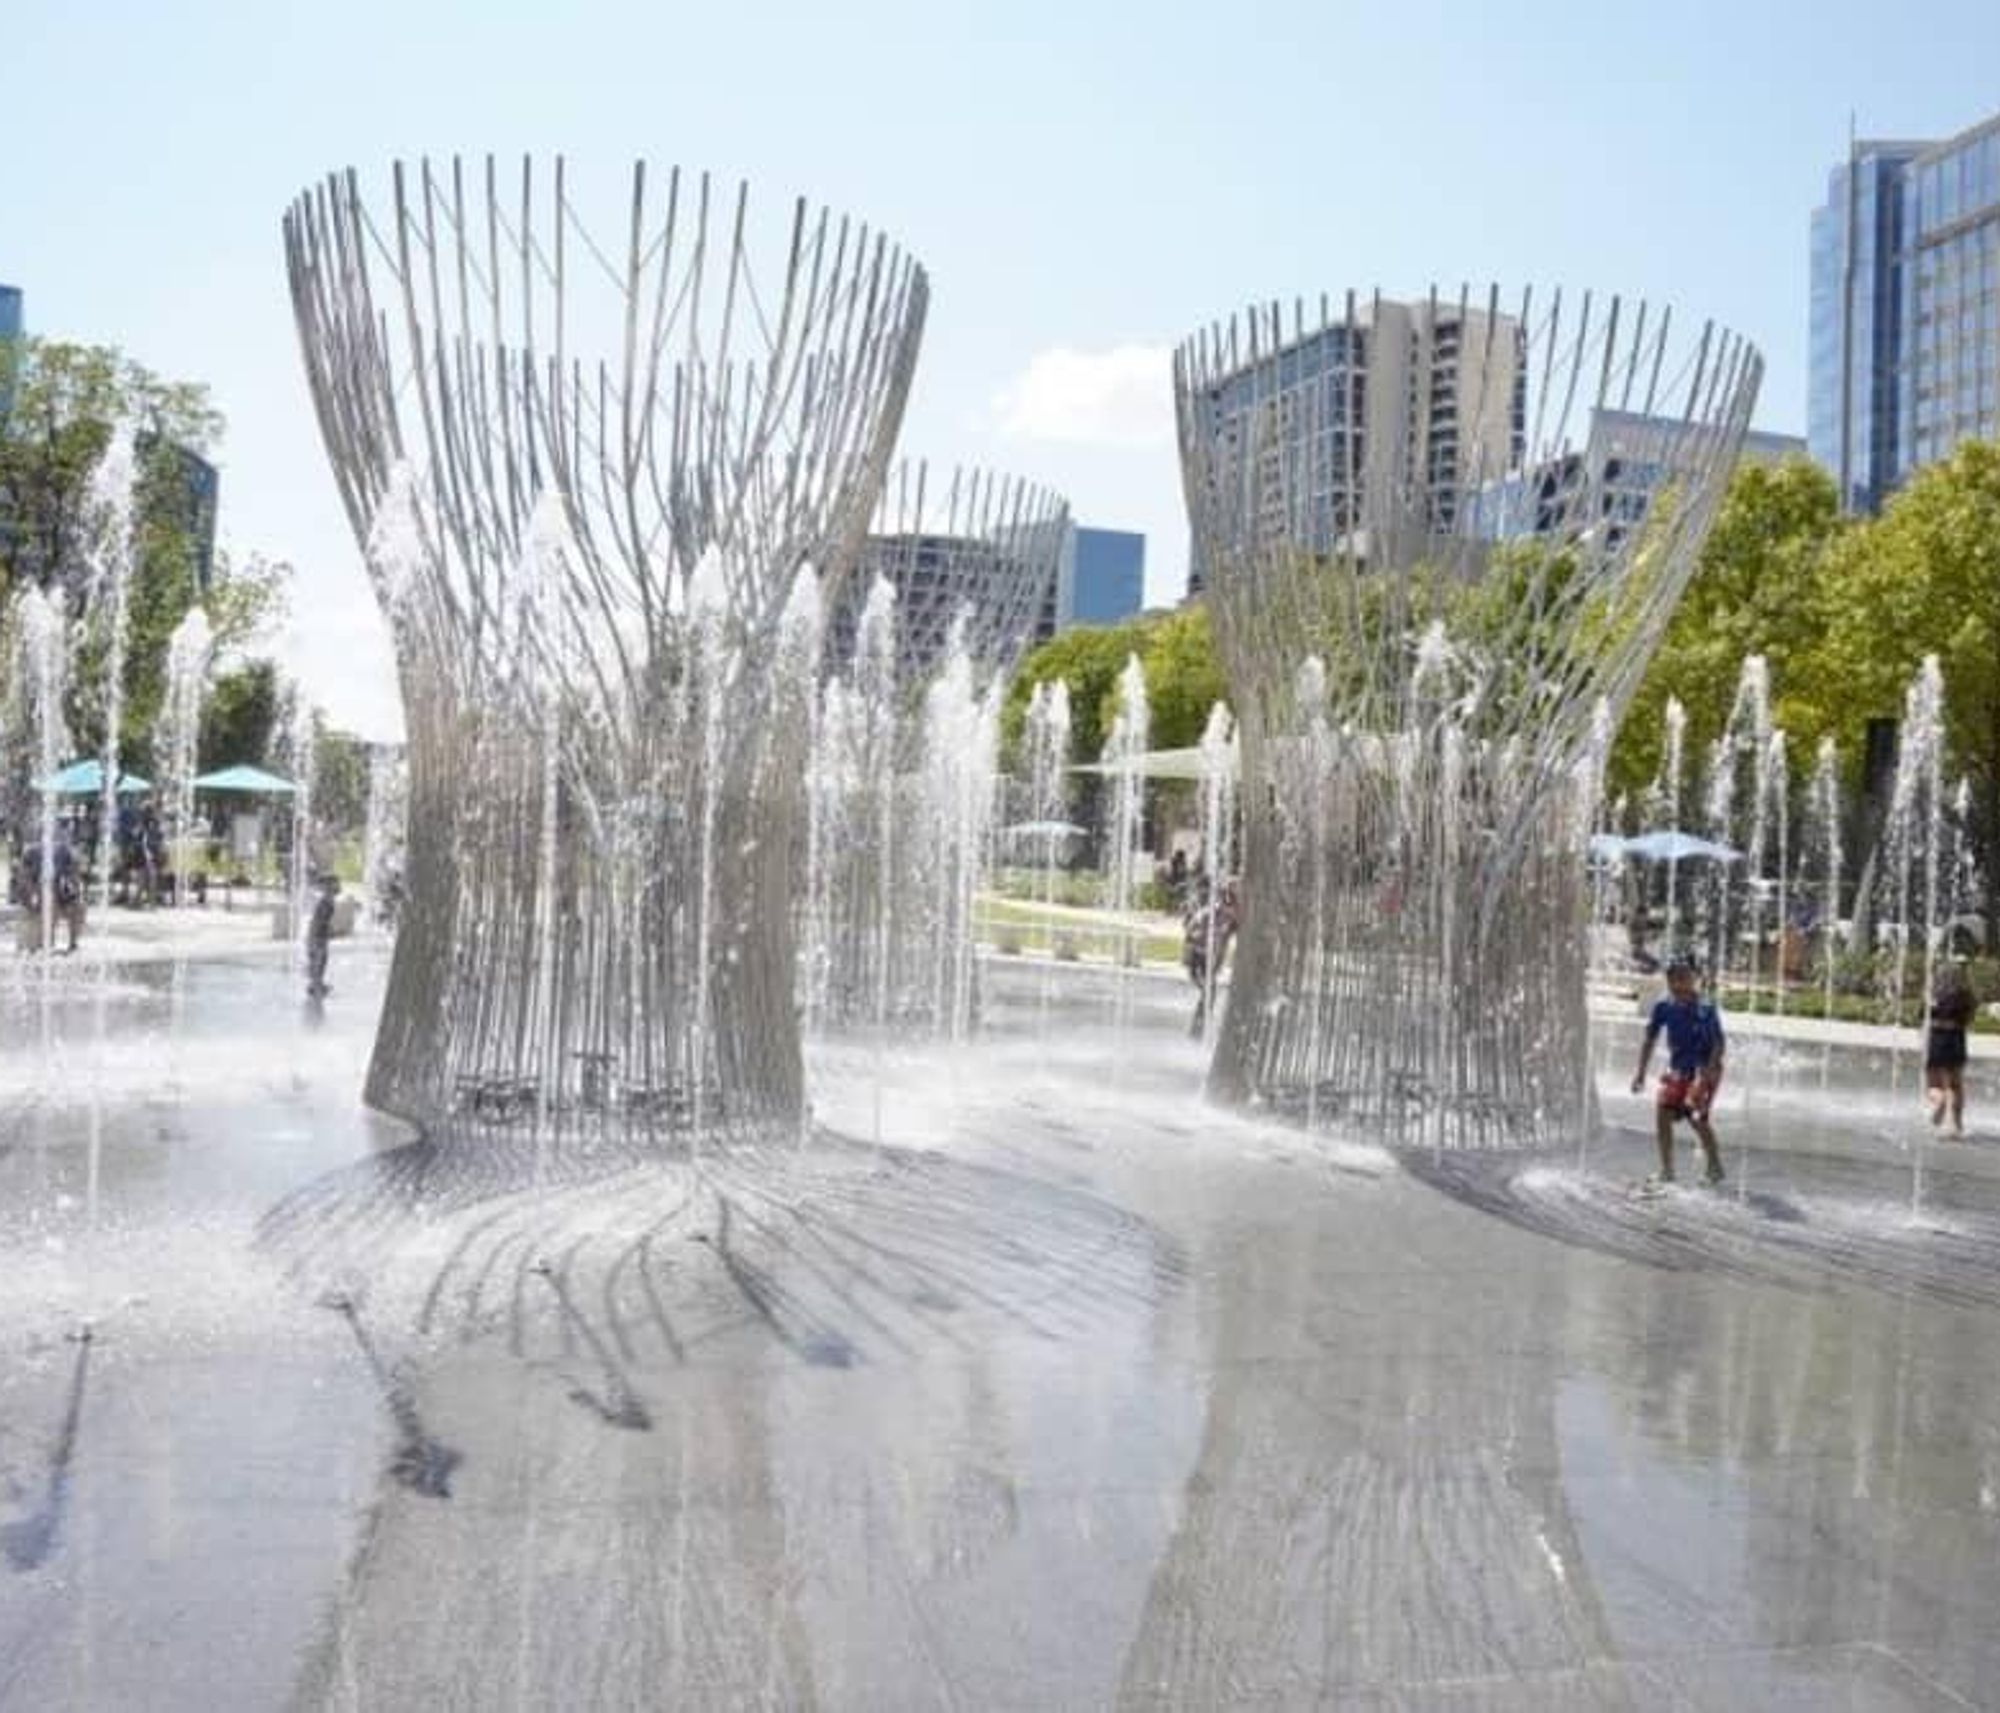 Soaked celebration: Plaza at True North Square opens to public under rainy  skies